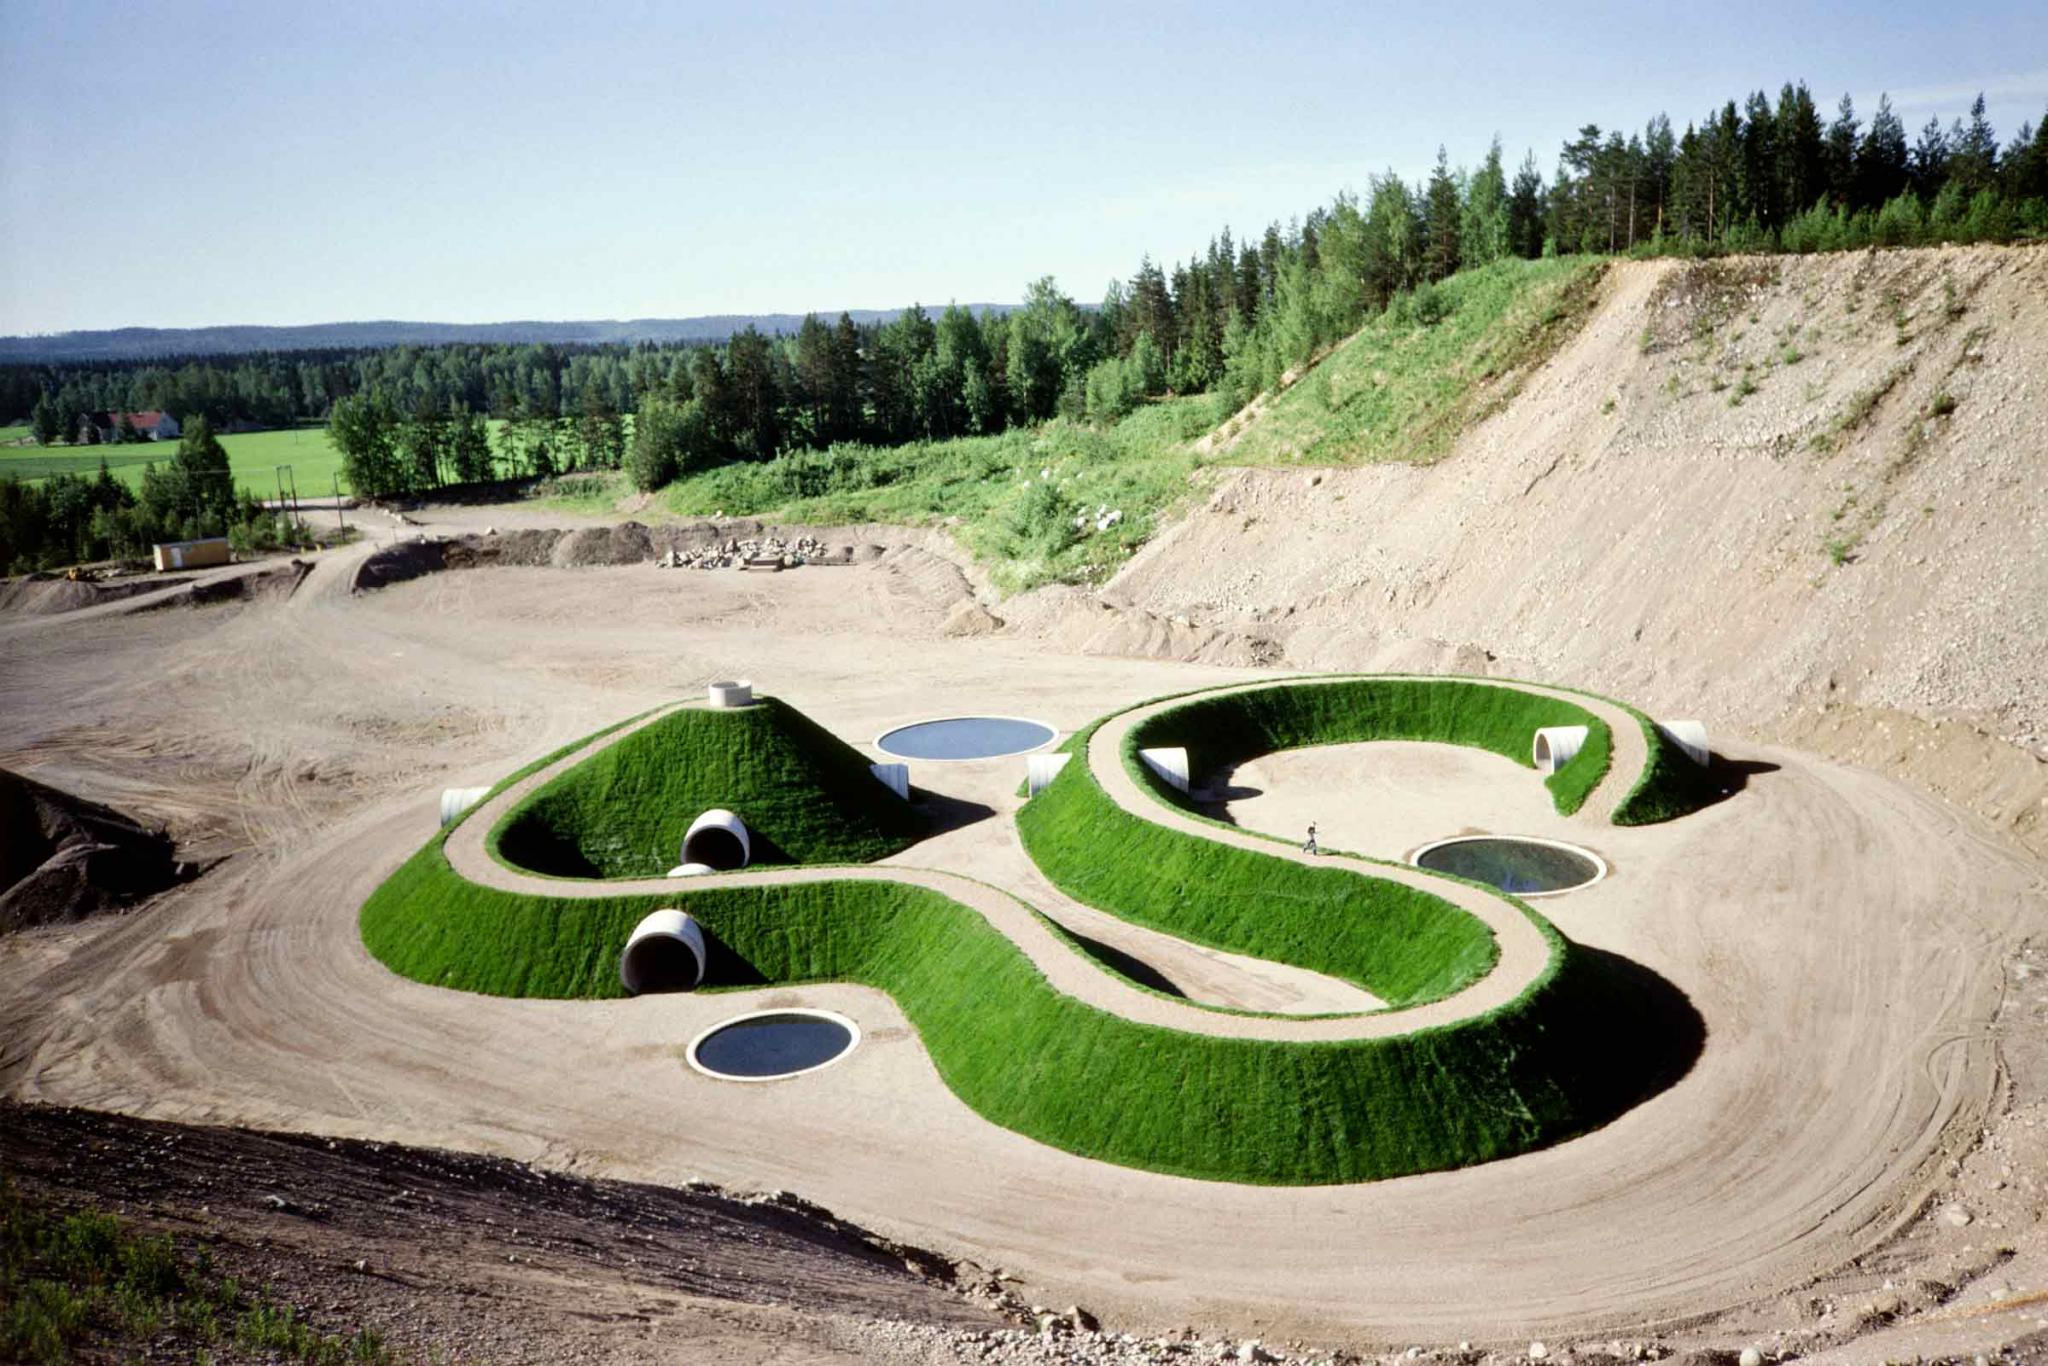 a curving mound of earth with tunnels and pathways throughout